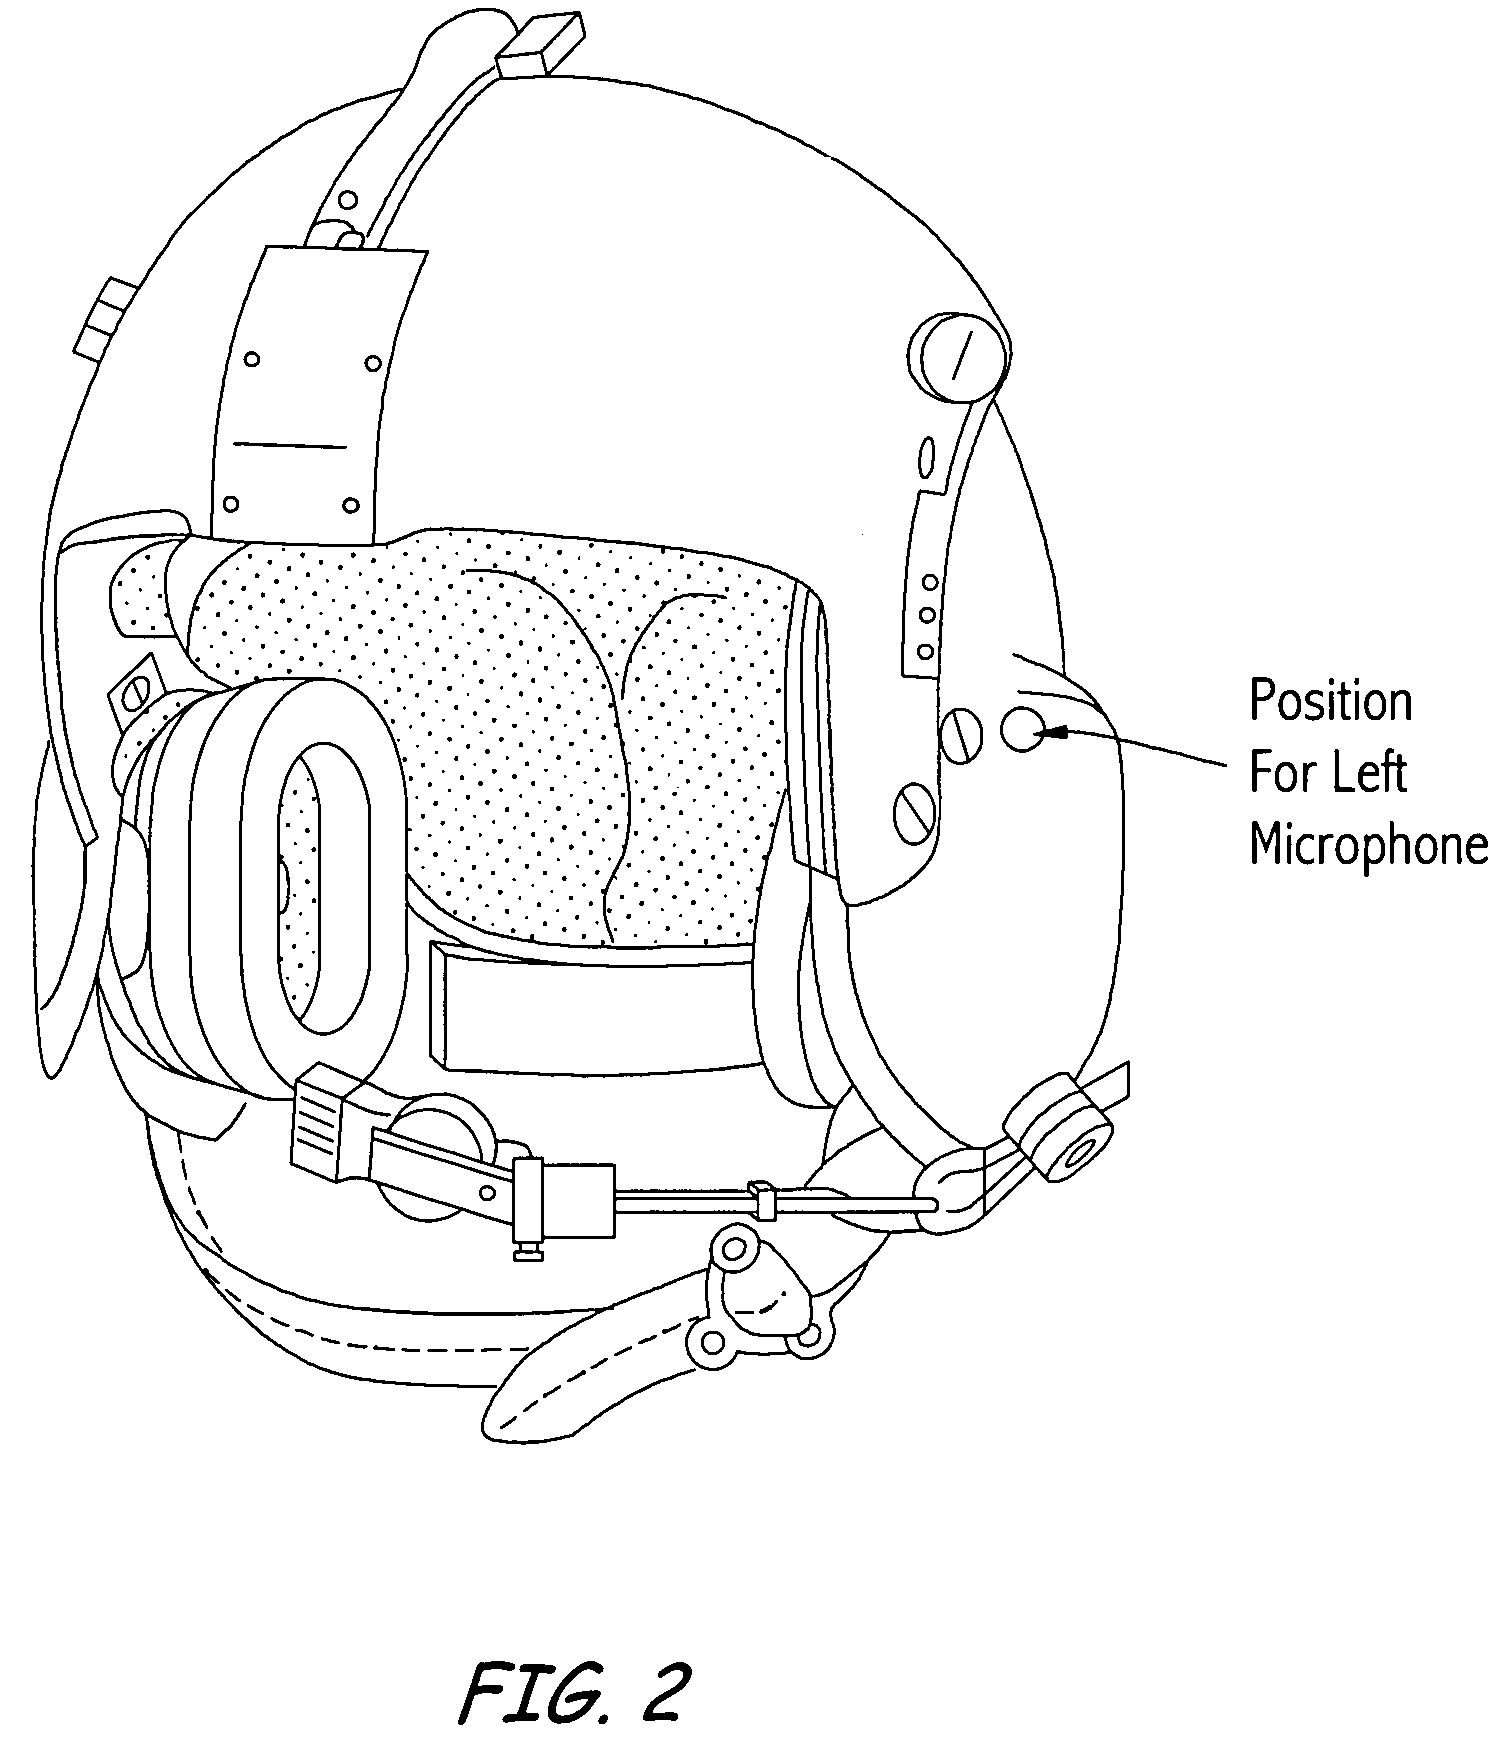 Apparatus for communication and reconnaissance coupled with protection of the auditory system